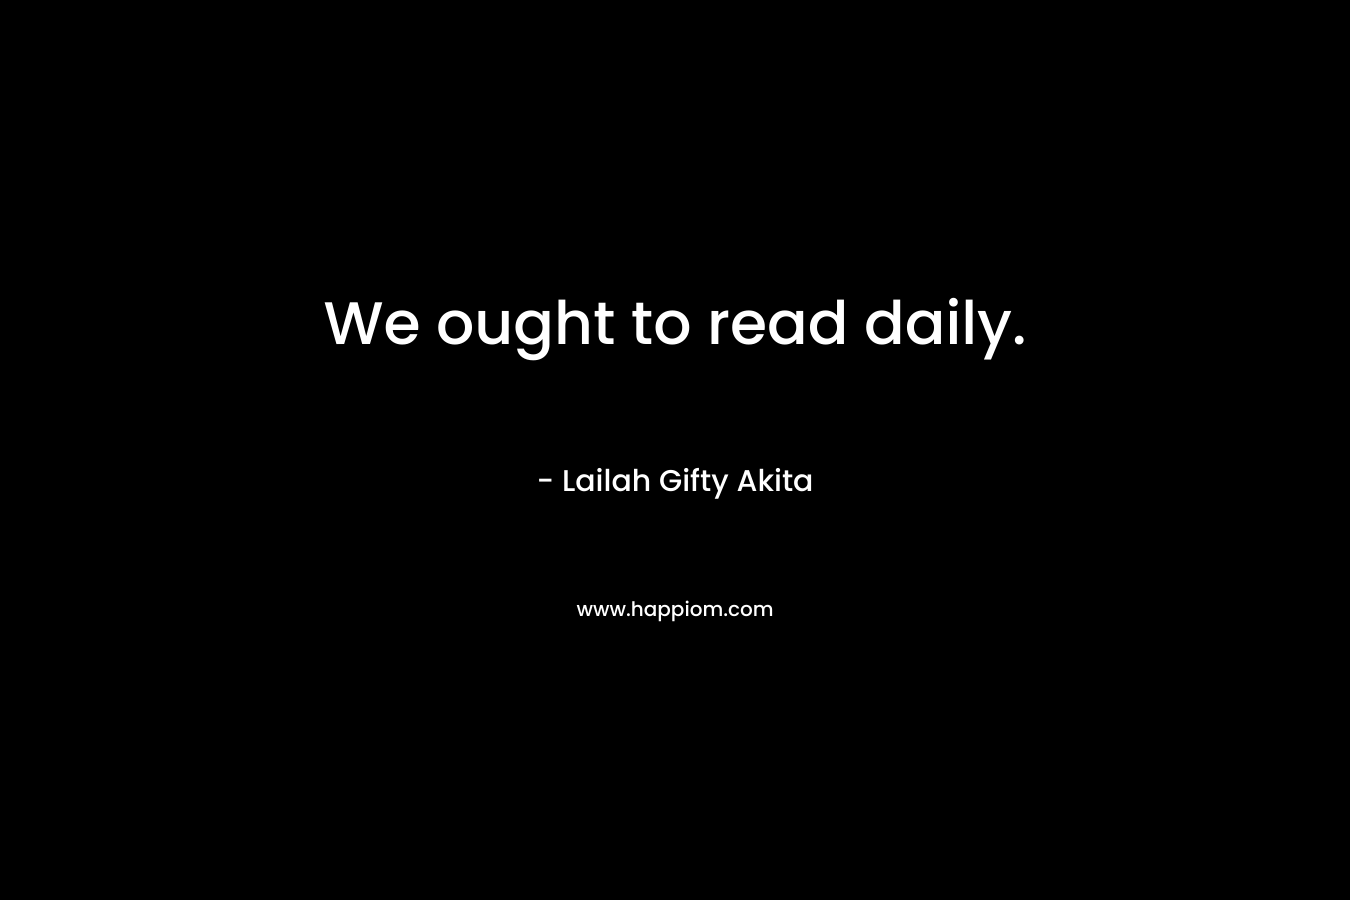 We ought to read daily.